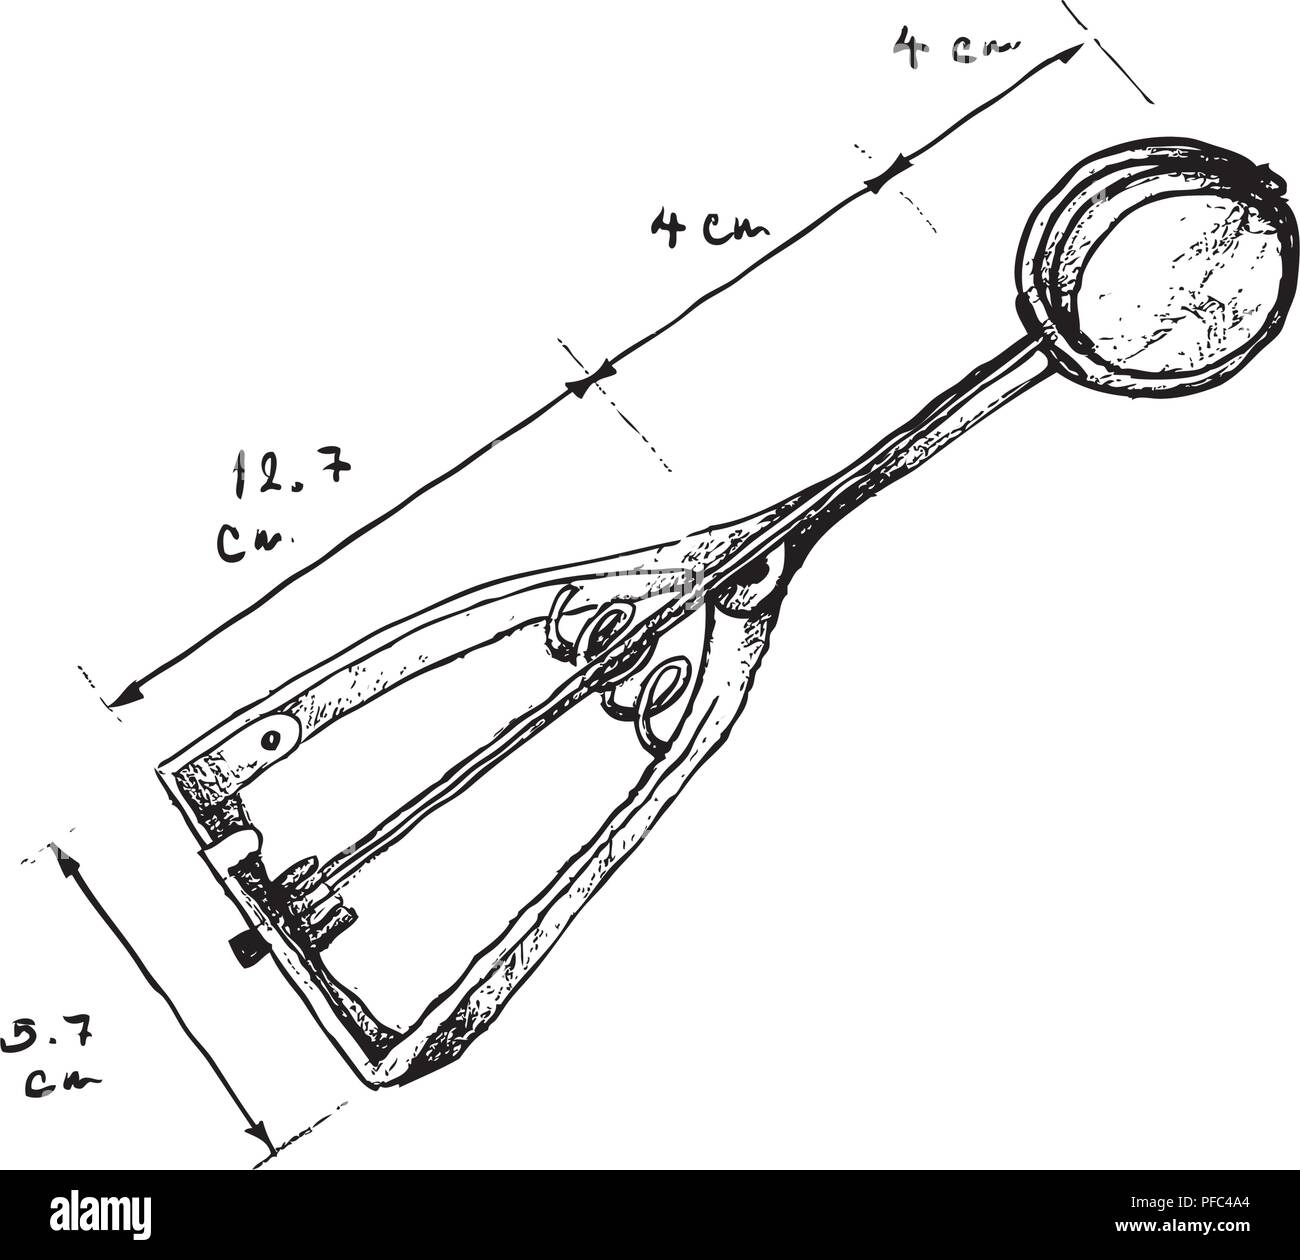 https://c8.alamy.com/comp/PFC4A4/illustration-hand-drawn-sketch-dimension-of-disher-scoop-sizes-or-ice-cream-scoops-isolated-on-white-background-a-device-used-to-measure-a-portion-of-PFC4A4.jpg